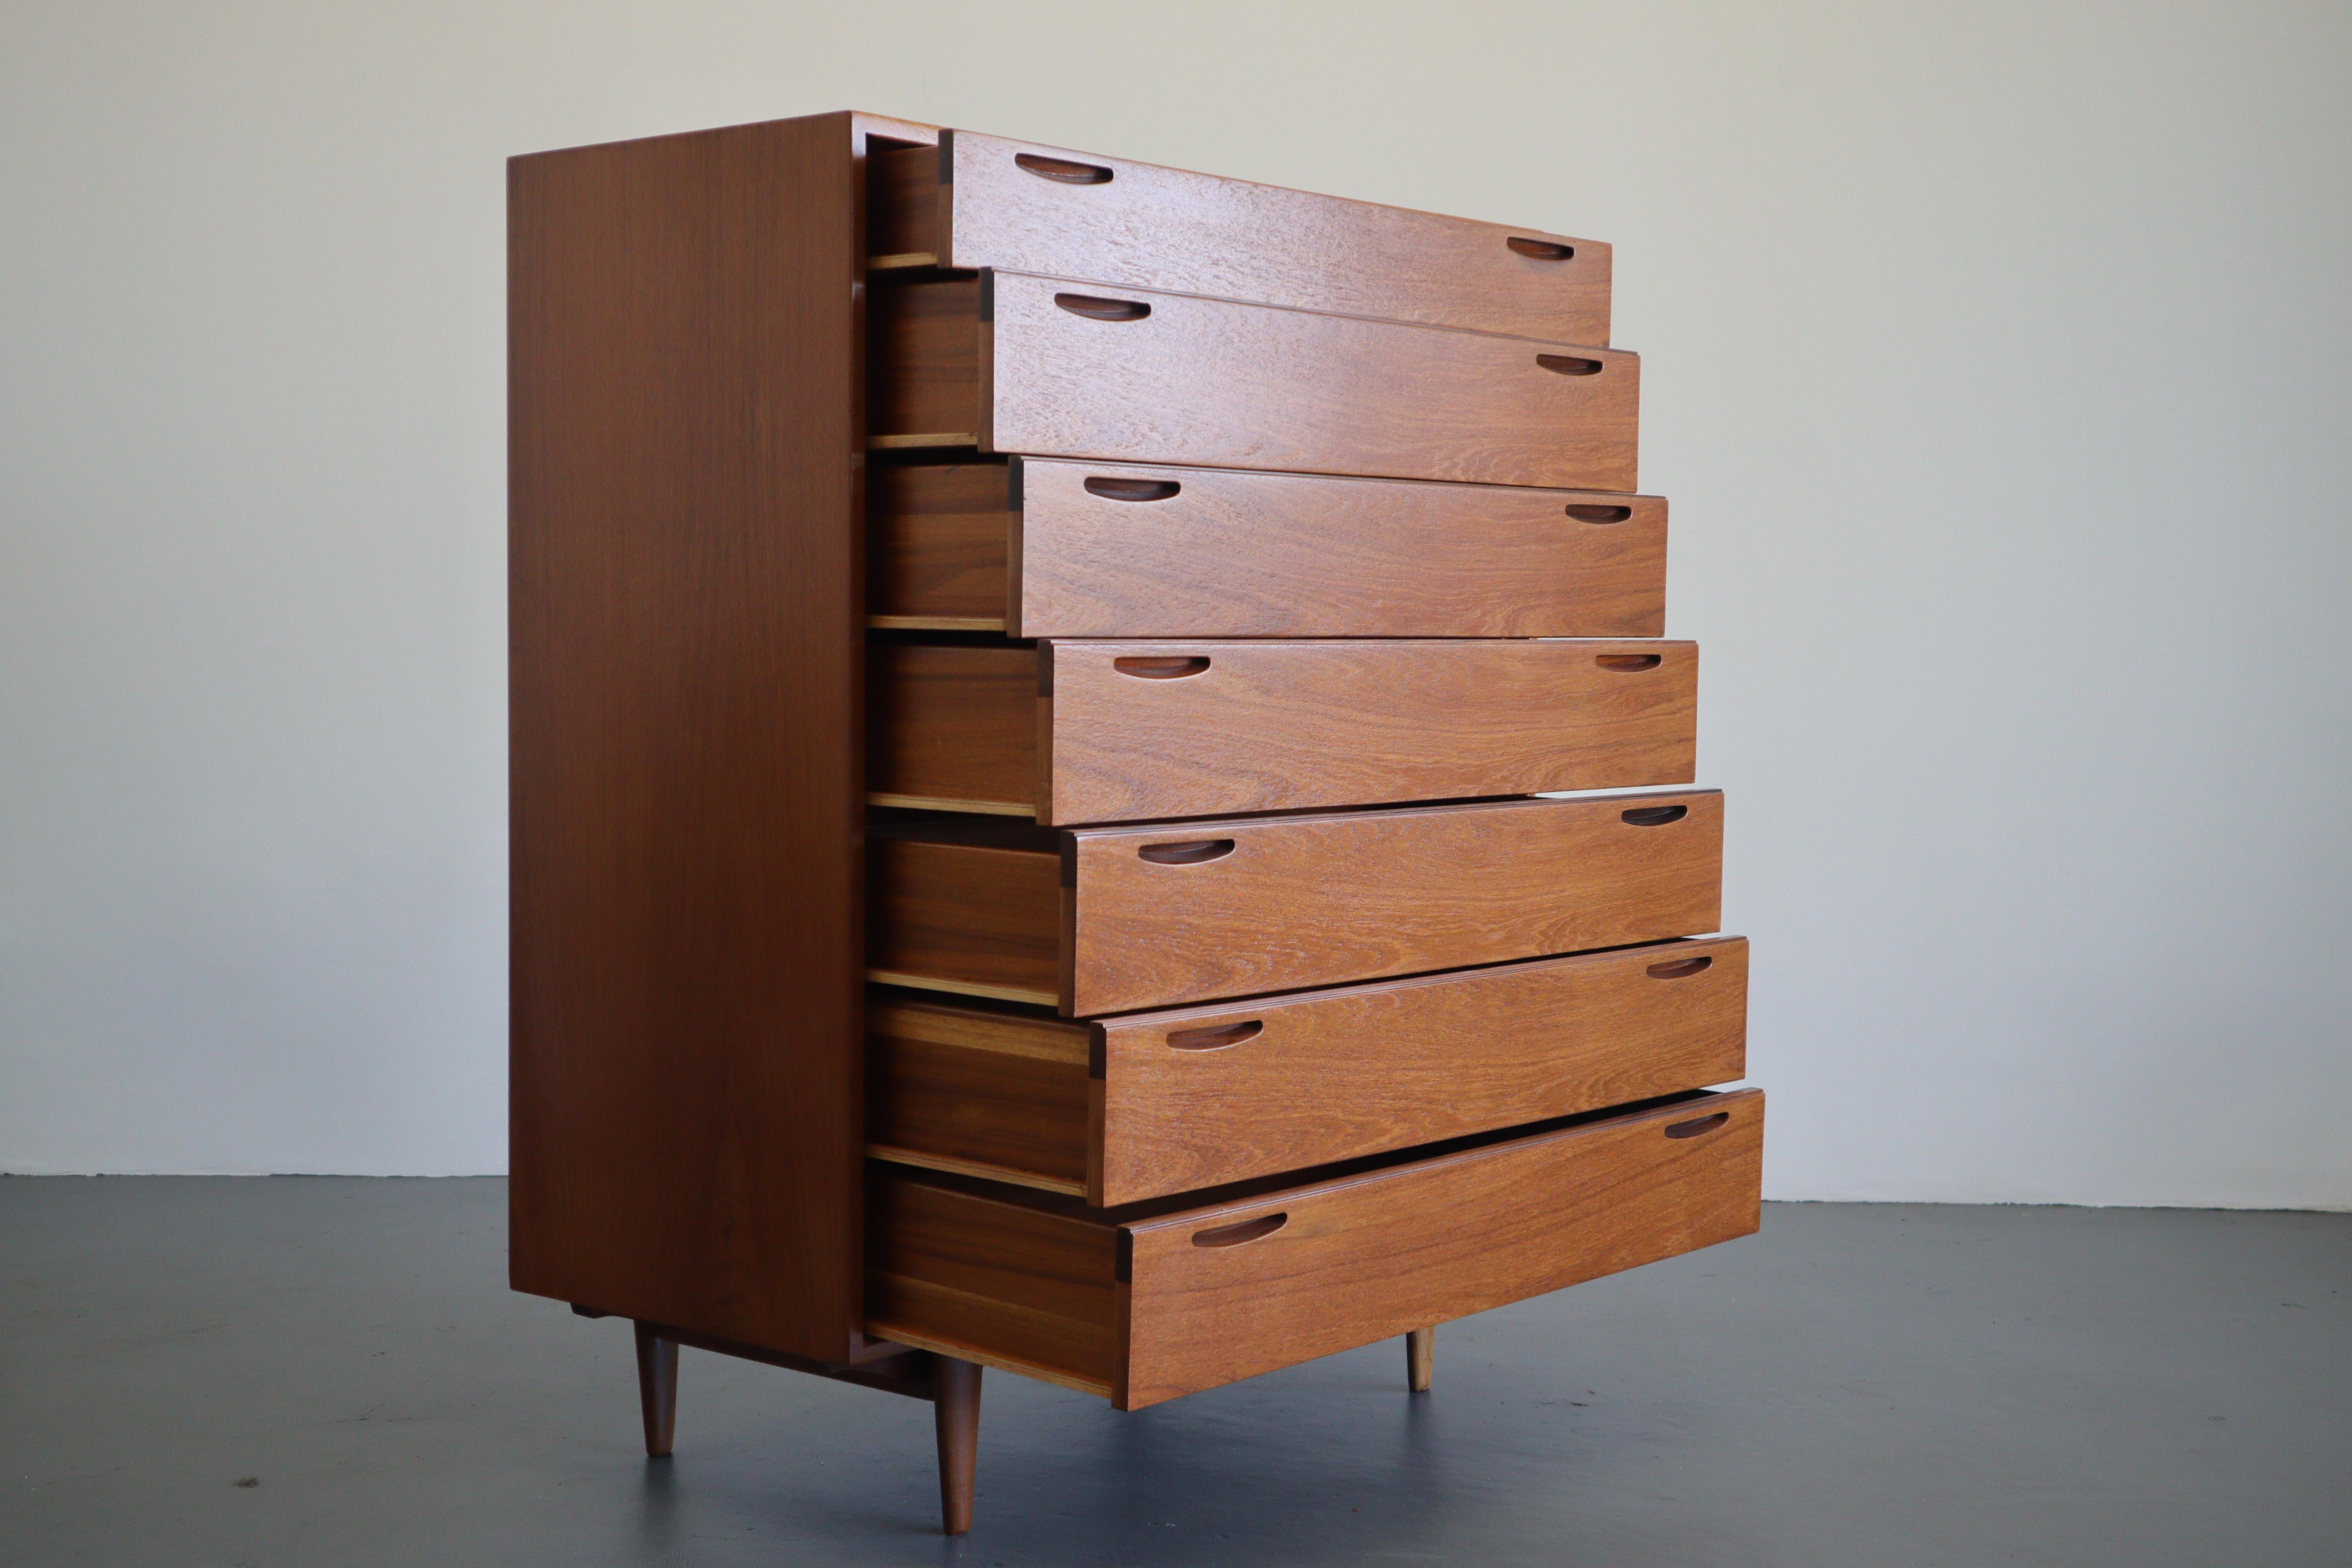 An exceptional Danish modern 7 drawer highboy by Kofod Larsen for Brande Mobelfabrik. Beautiful grain throughout front and back with no notable damage. This piece offers plenty of storage with sleek minimalist pulls The piece sits atop afrormosia